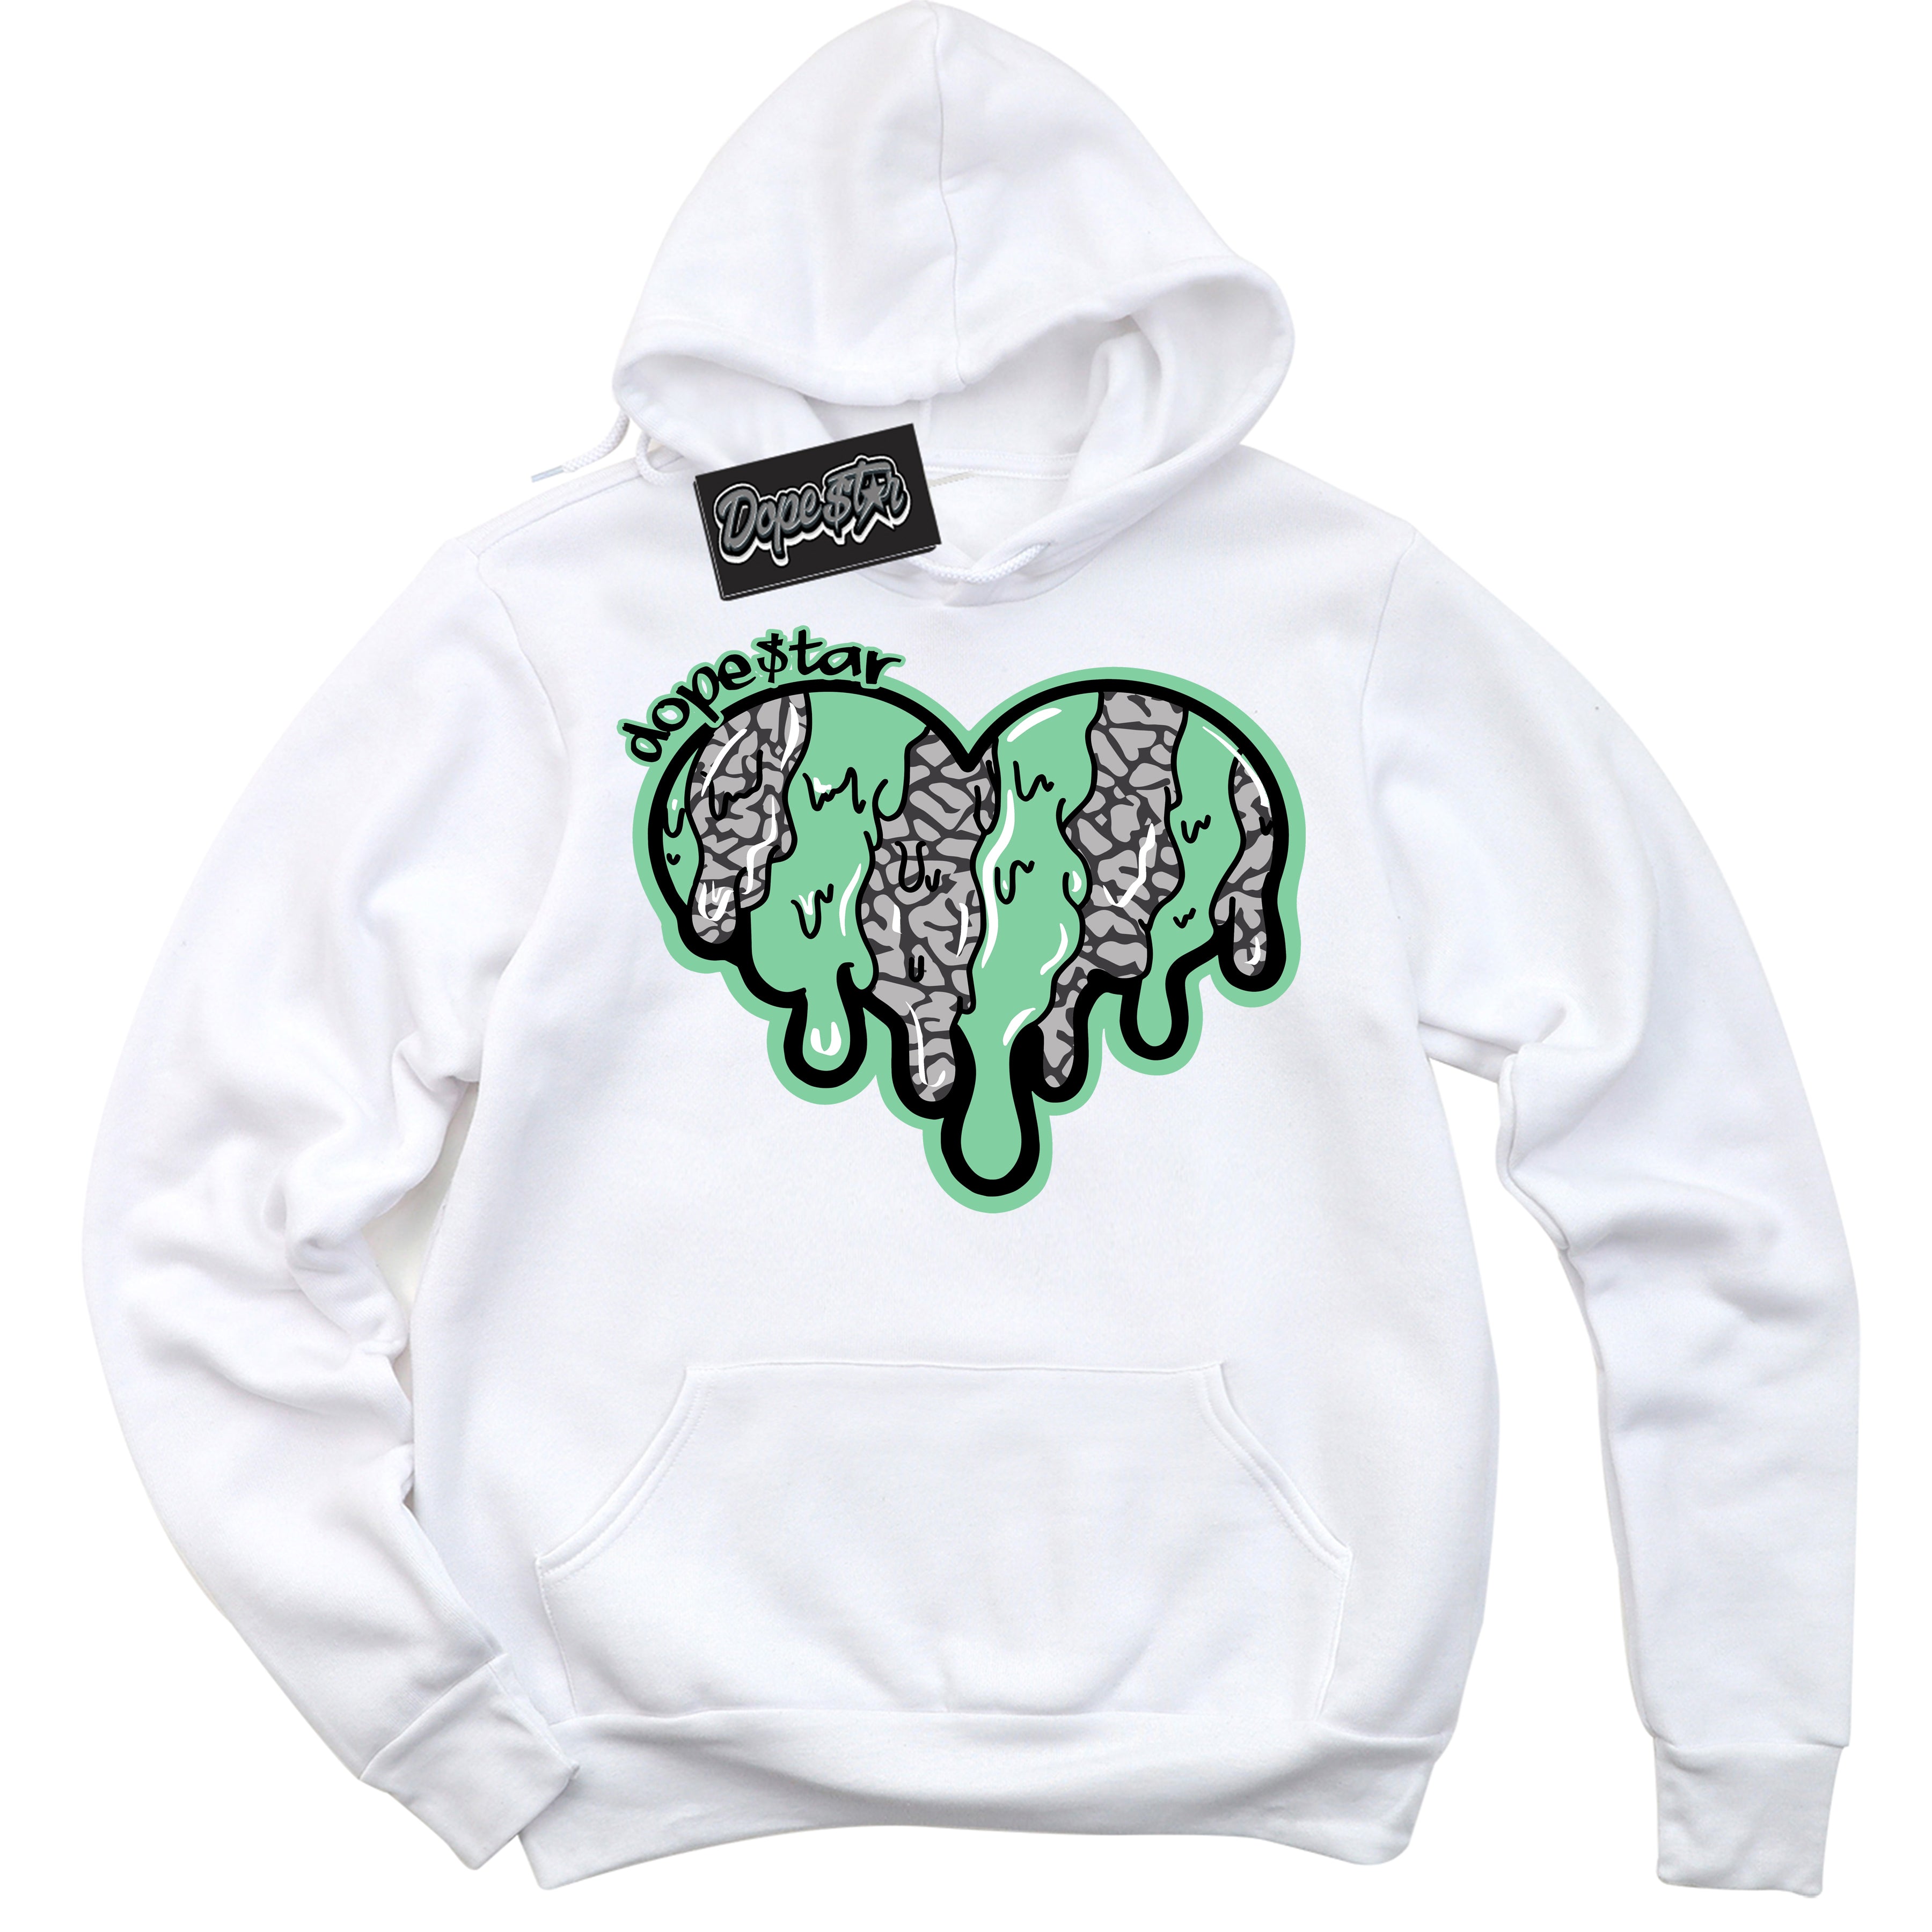 Cool White Graphic DopeStar Hoodie with “ Melting Heart “ print, that perfectly matches Green Glow 3s sneakers